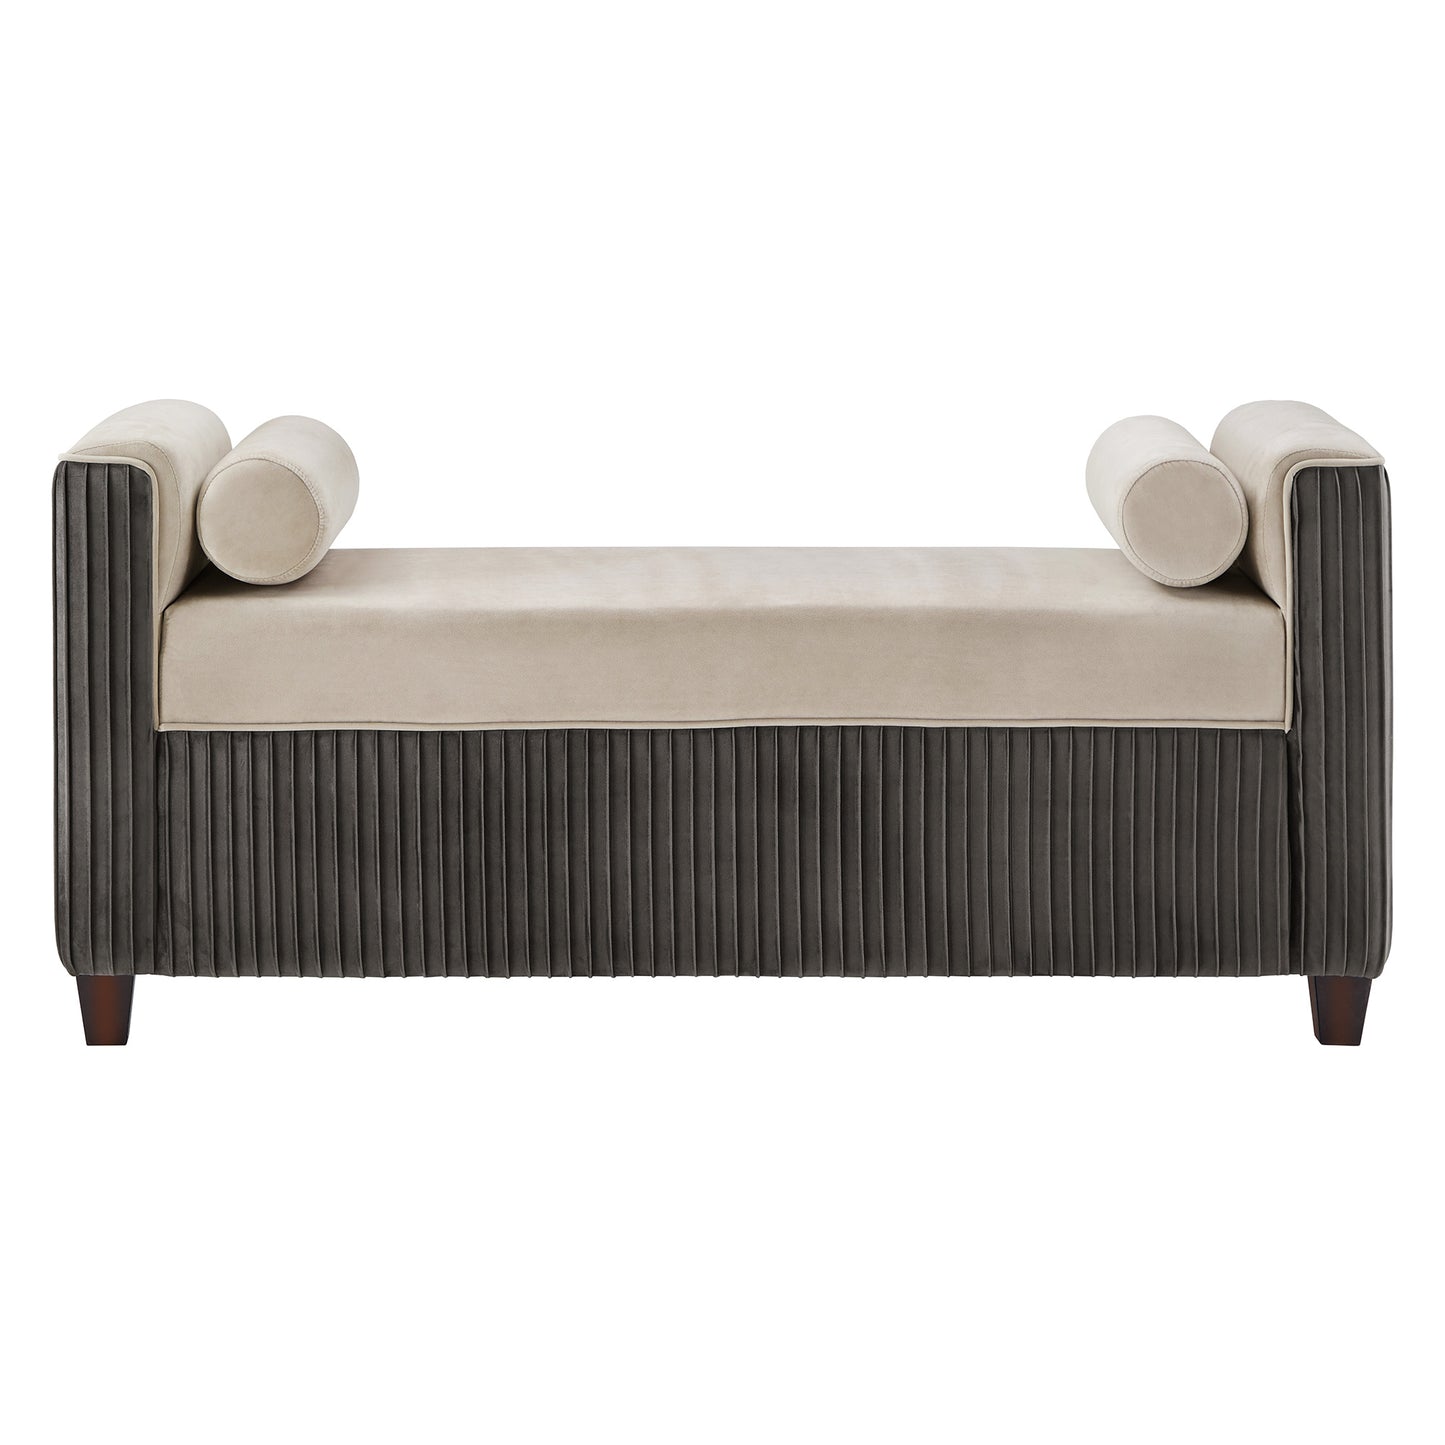 Chesterfield Pleated Velvet Bench with Pillows - Taupe and Grey